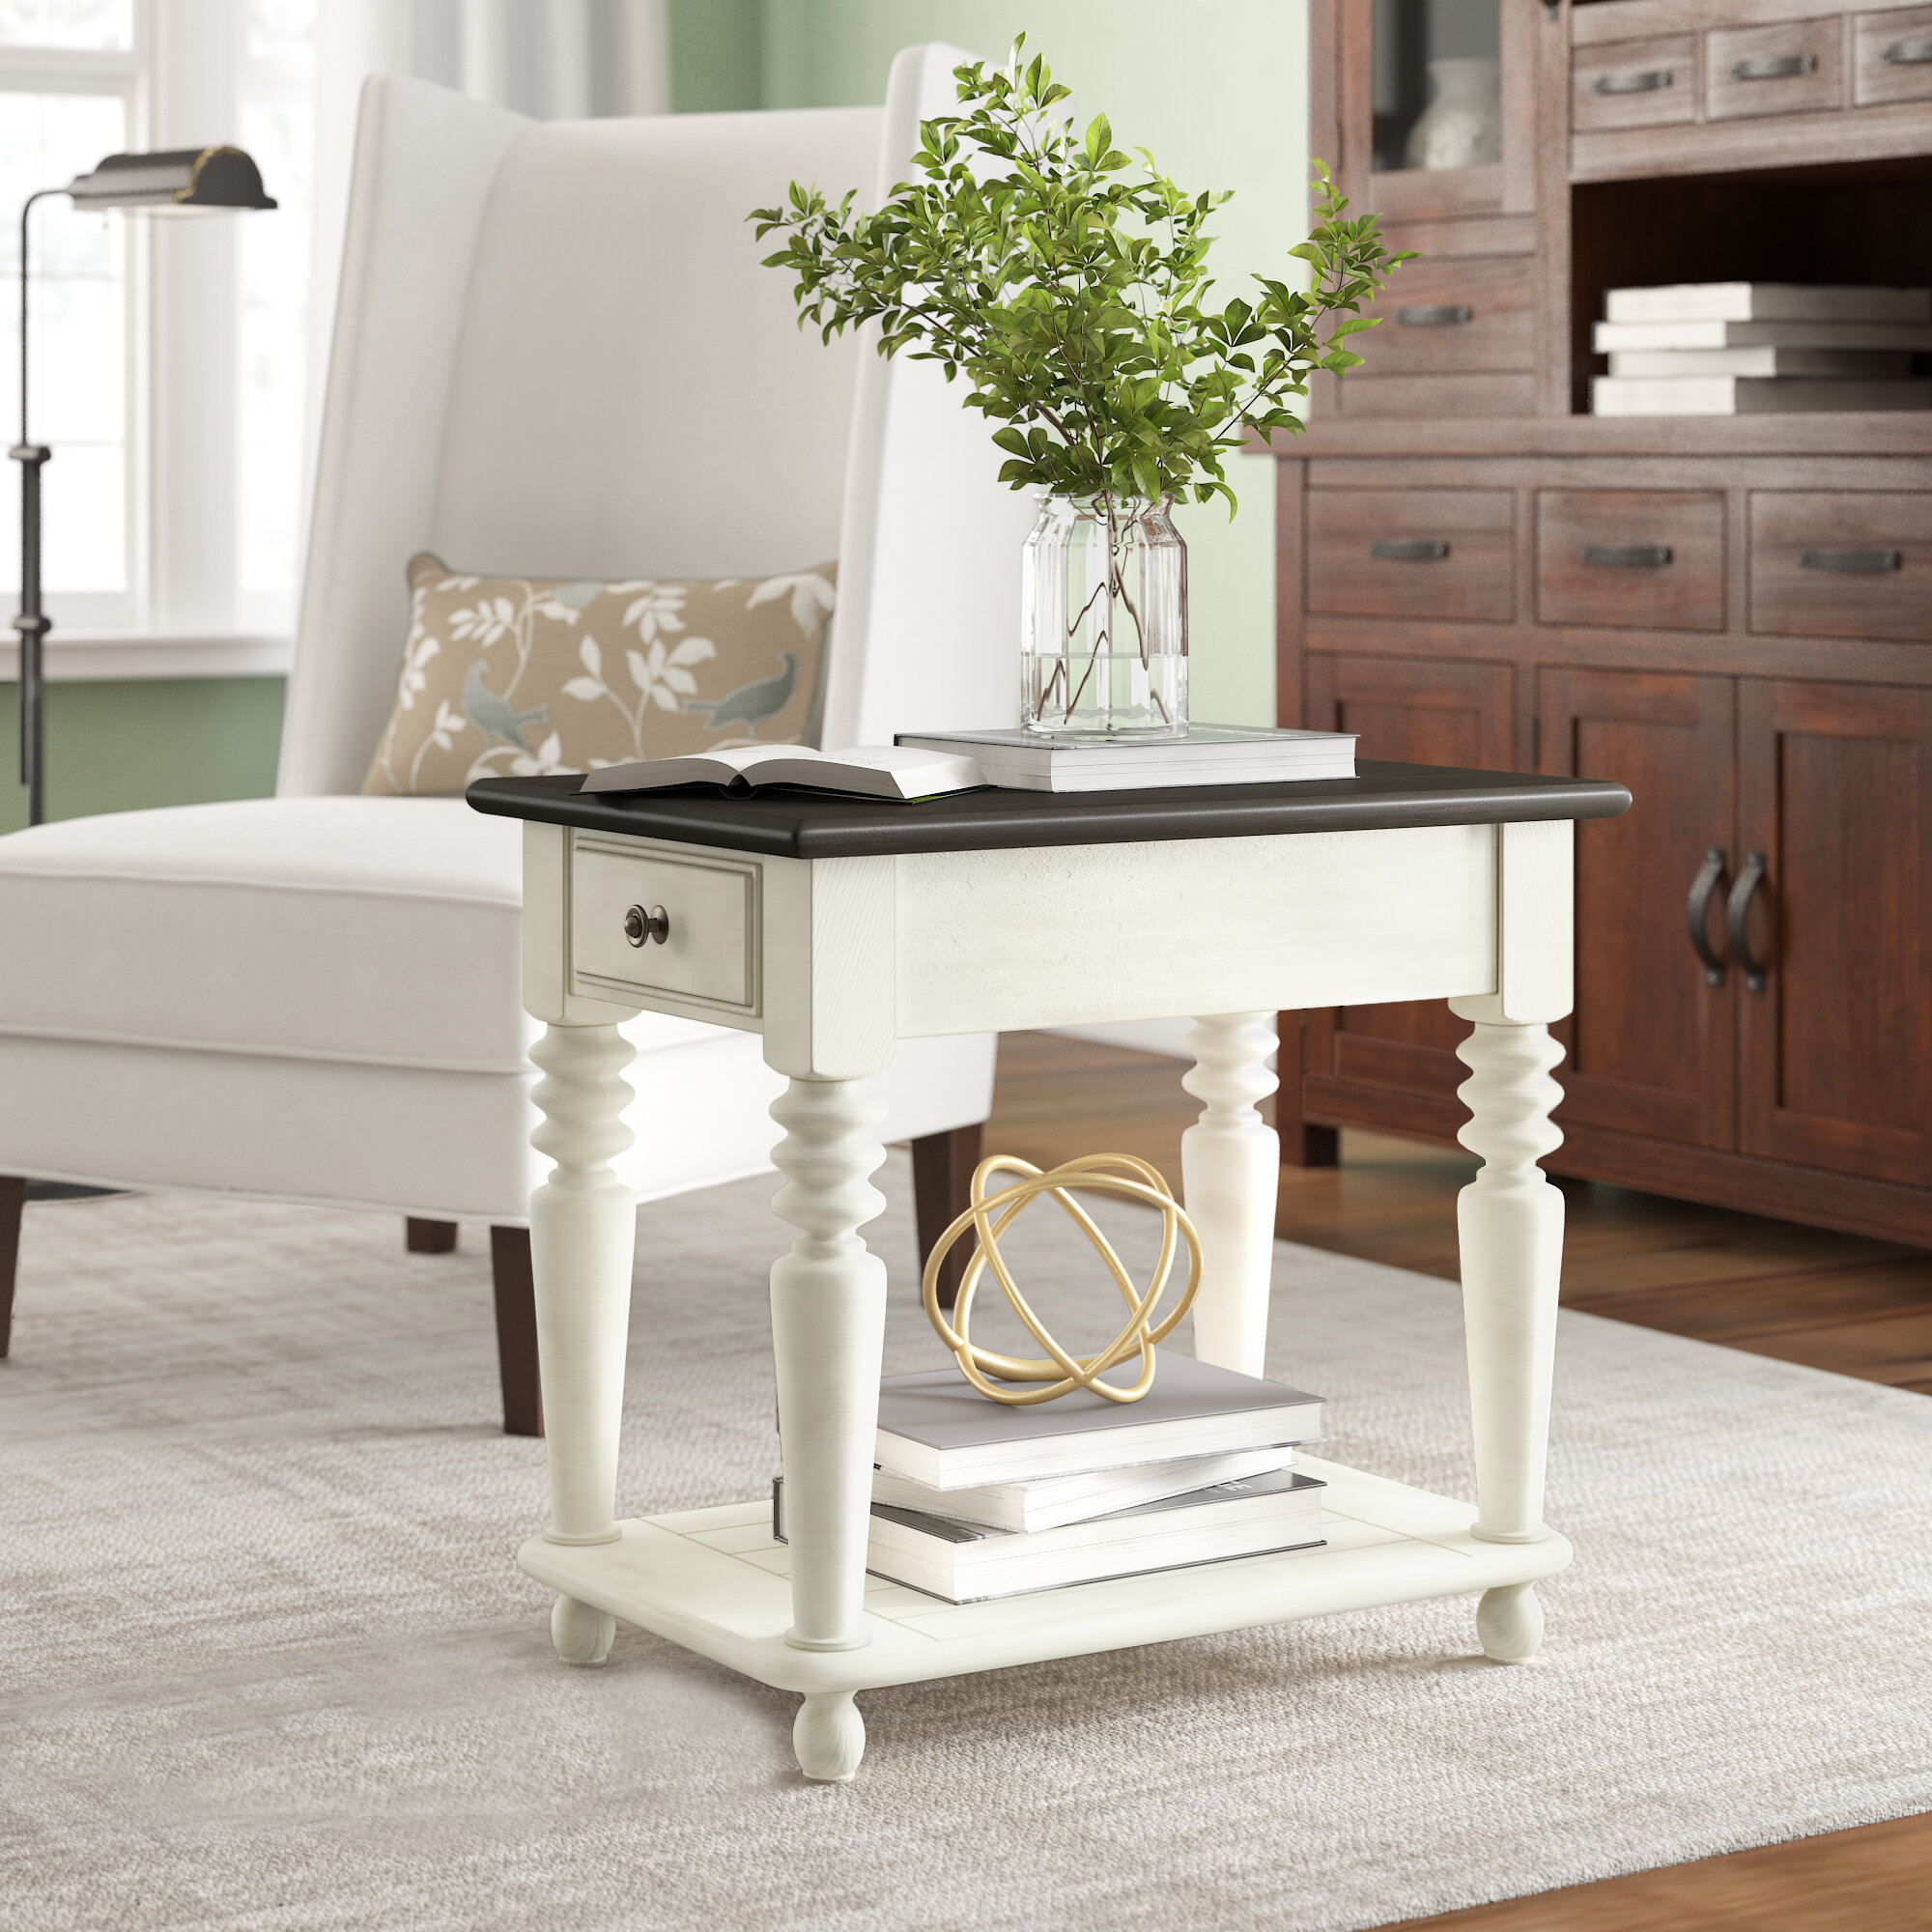 birch lane heritage calila end table with storage hadley accent drawer rattan side tables living room homeware decor front entrance furniture cordless touch lamps ashley pub